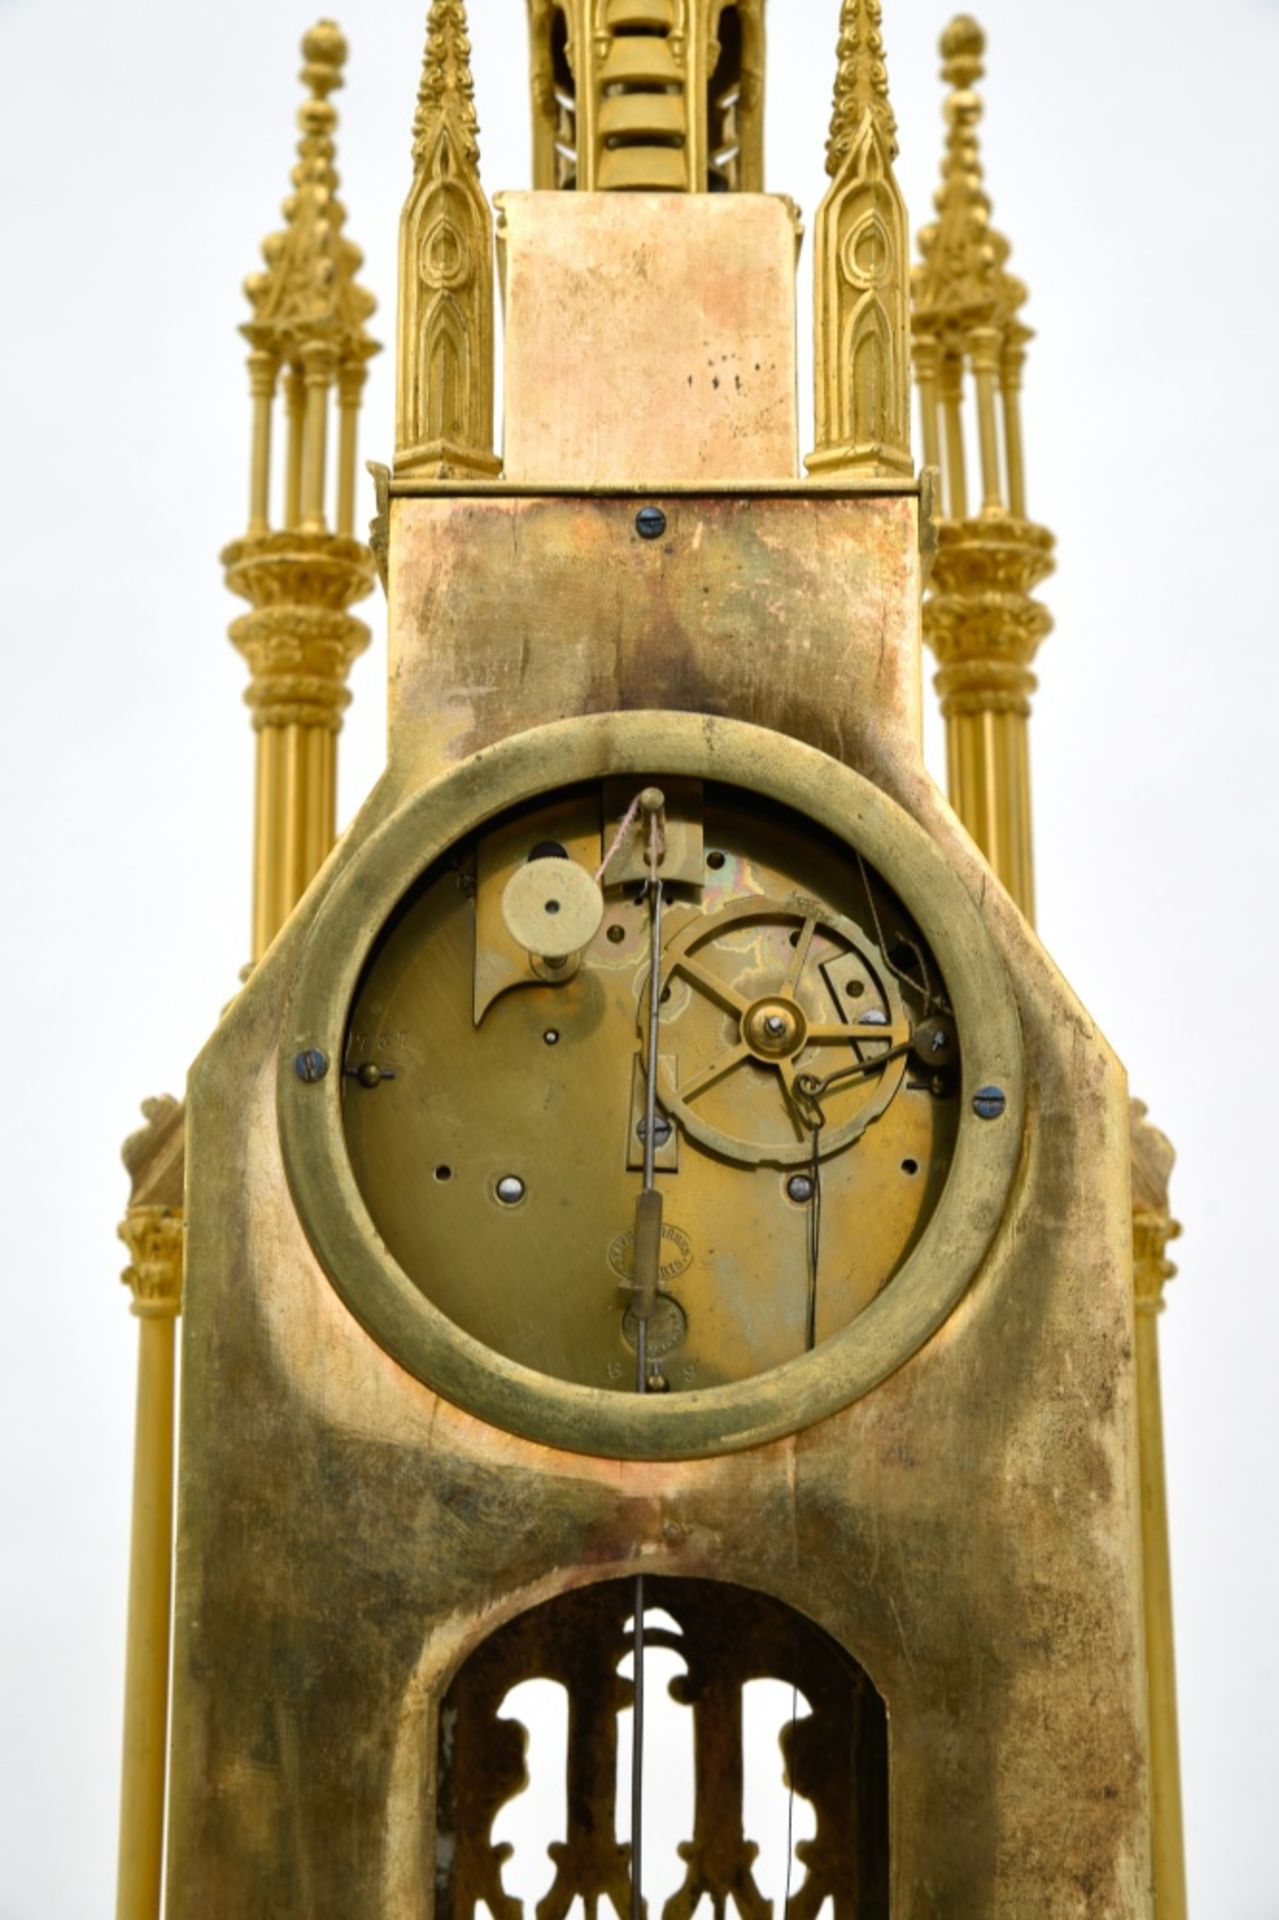 Early 19th century workCathedral clockBronze with golden patina, black-lacquered wood stand inlaid - Image 5 of 6